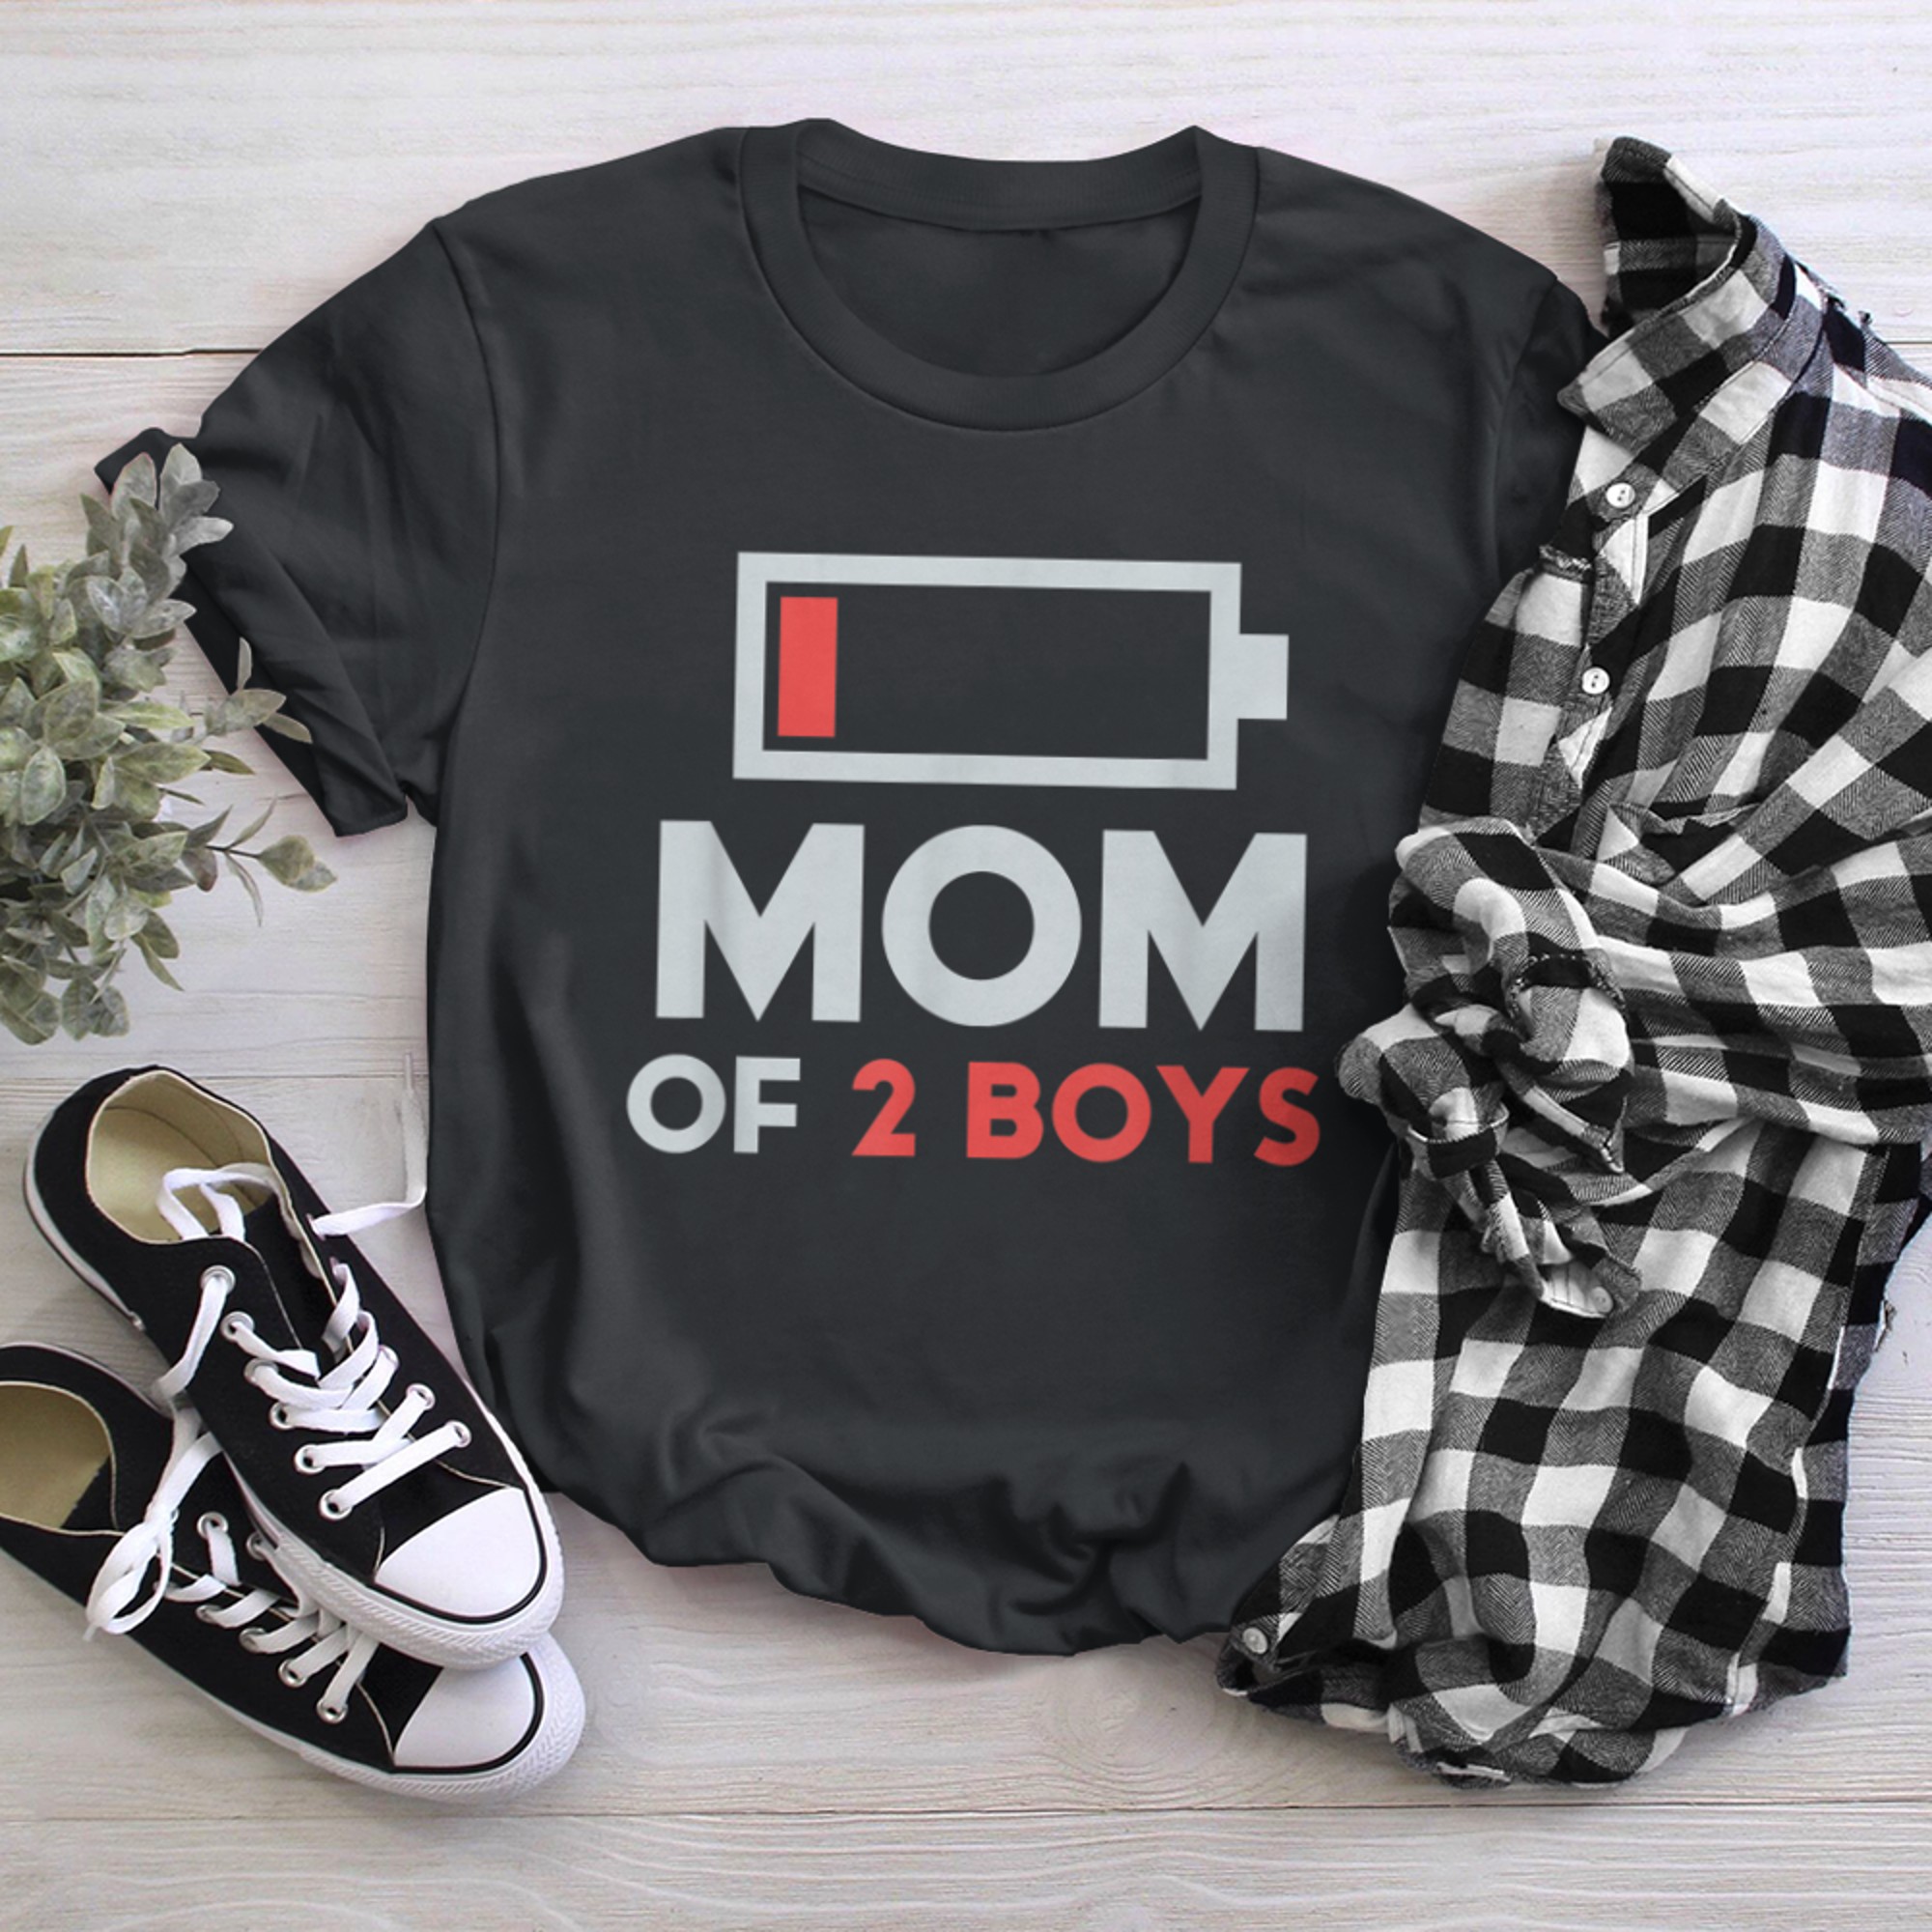 Mom of from Son Mothers Day Birthday (9) t-shirt black